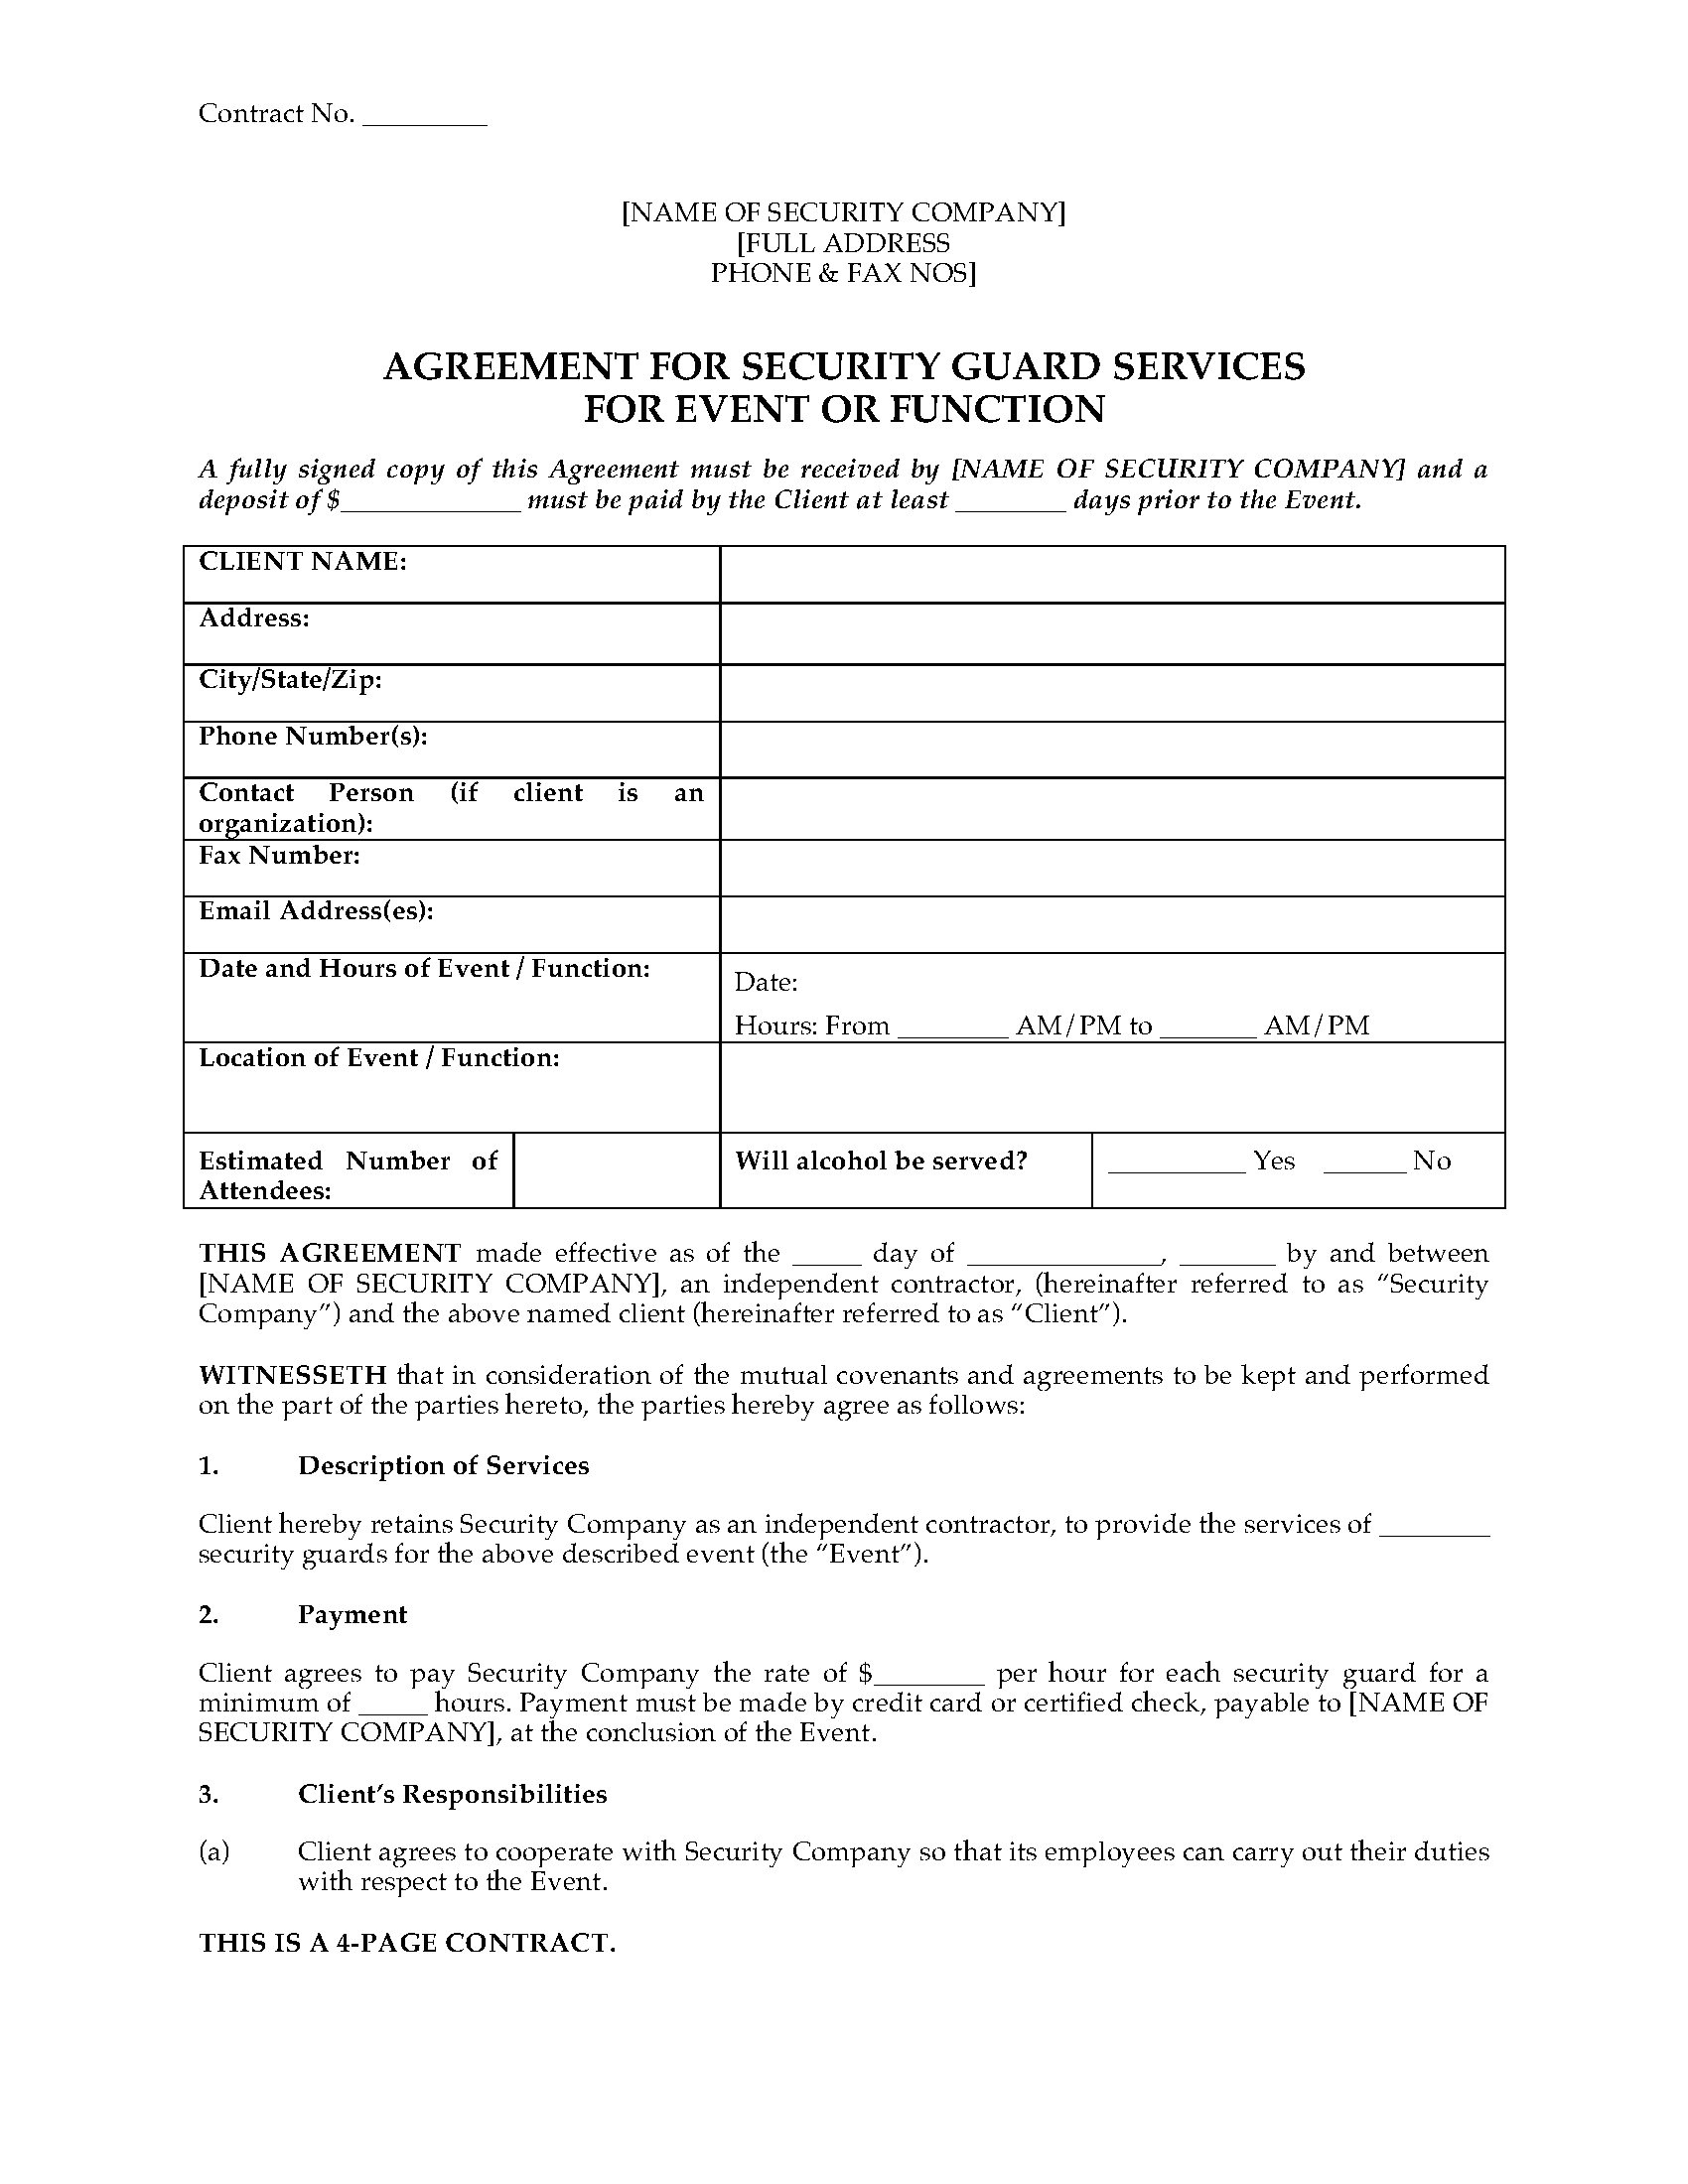 usa security guard agreement for event or function